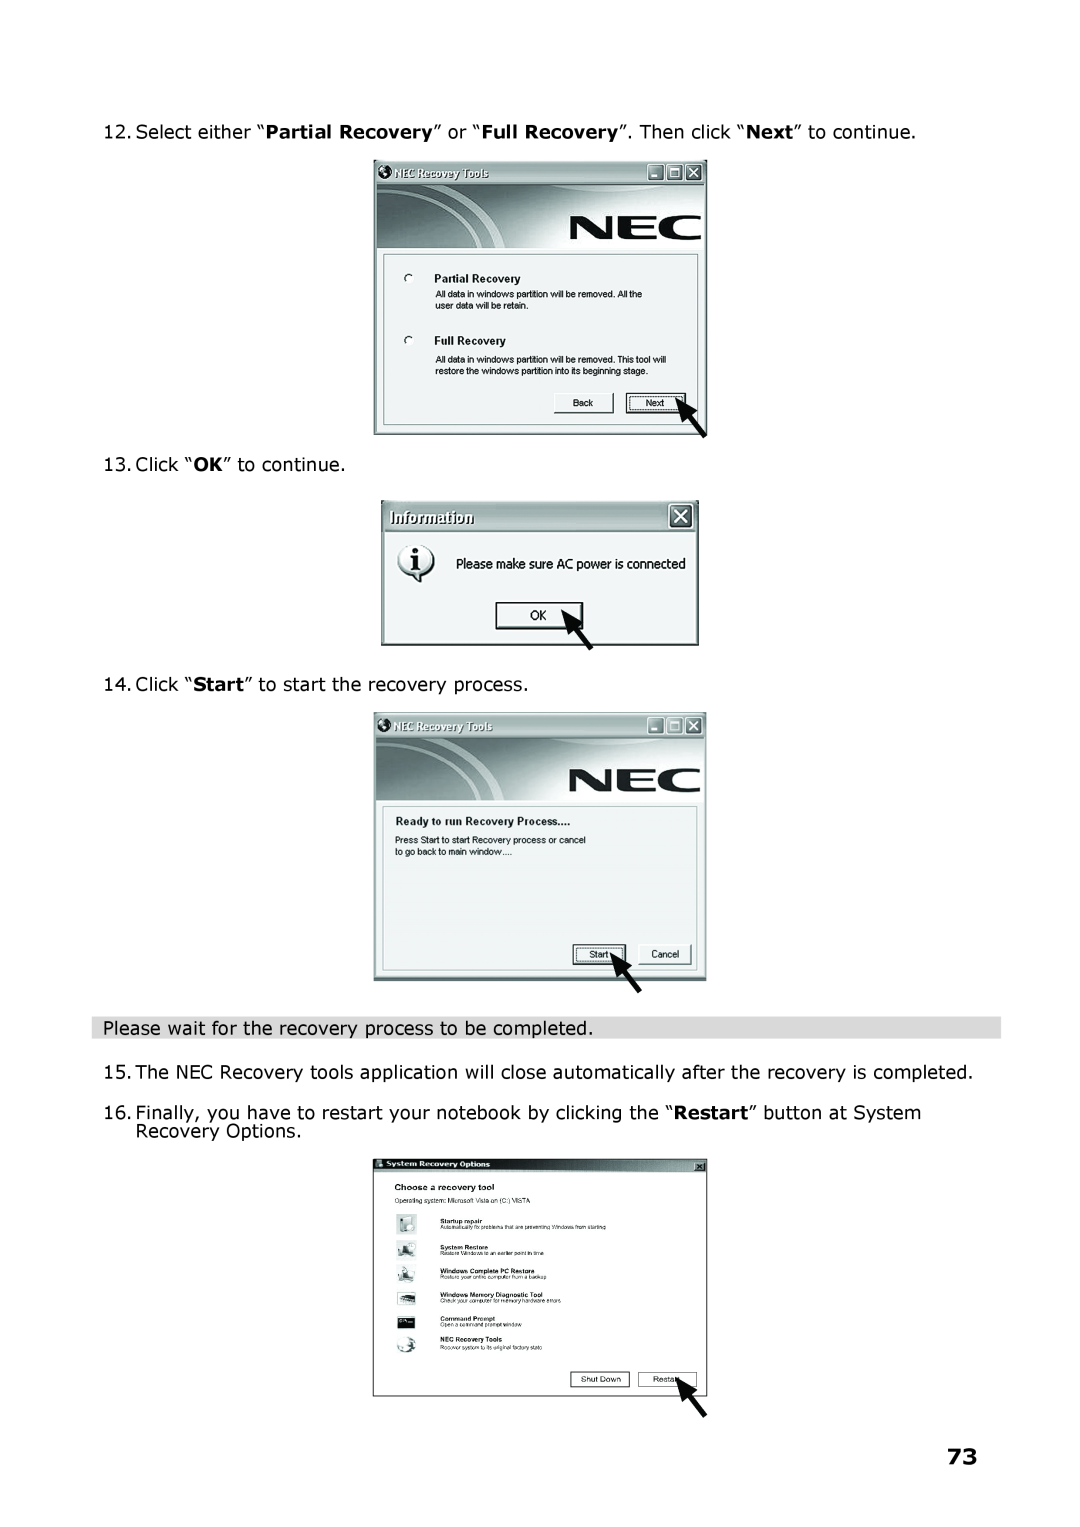 NEC P8510 manual Click “OK” to continue, Click “Start” to start the recovery process 